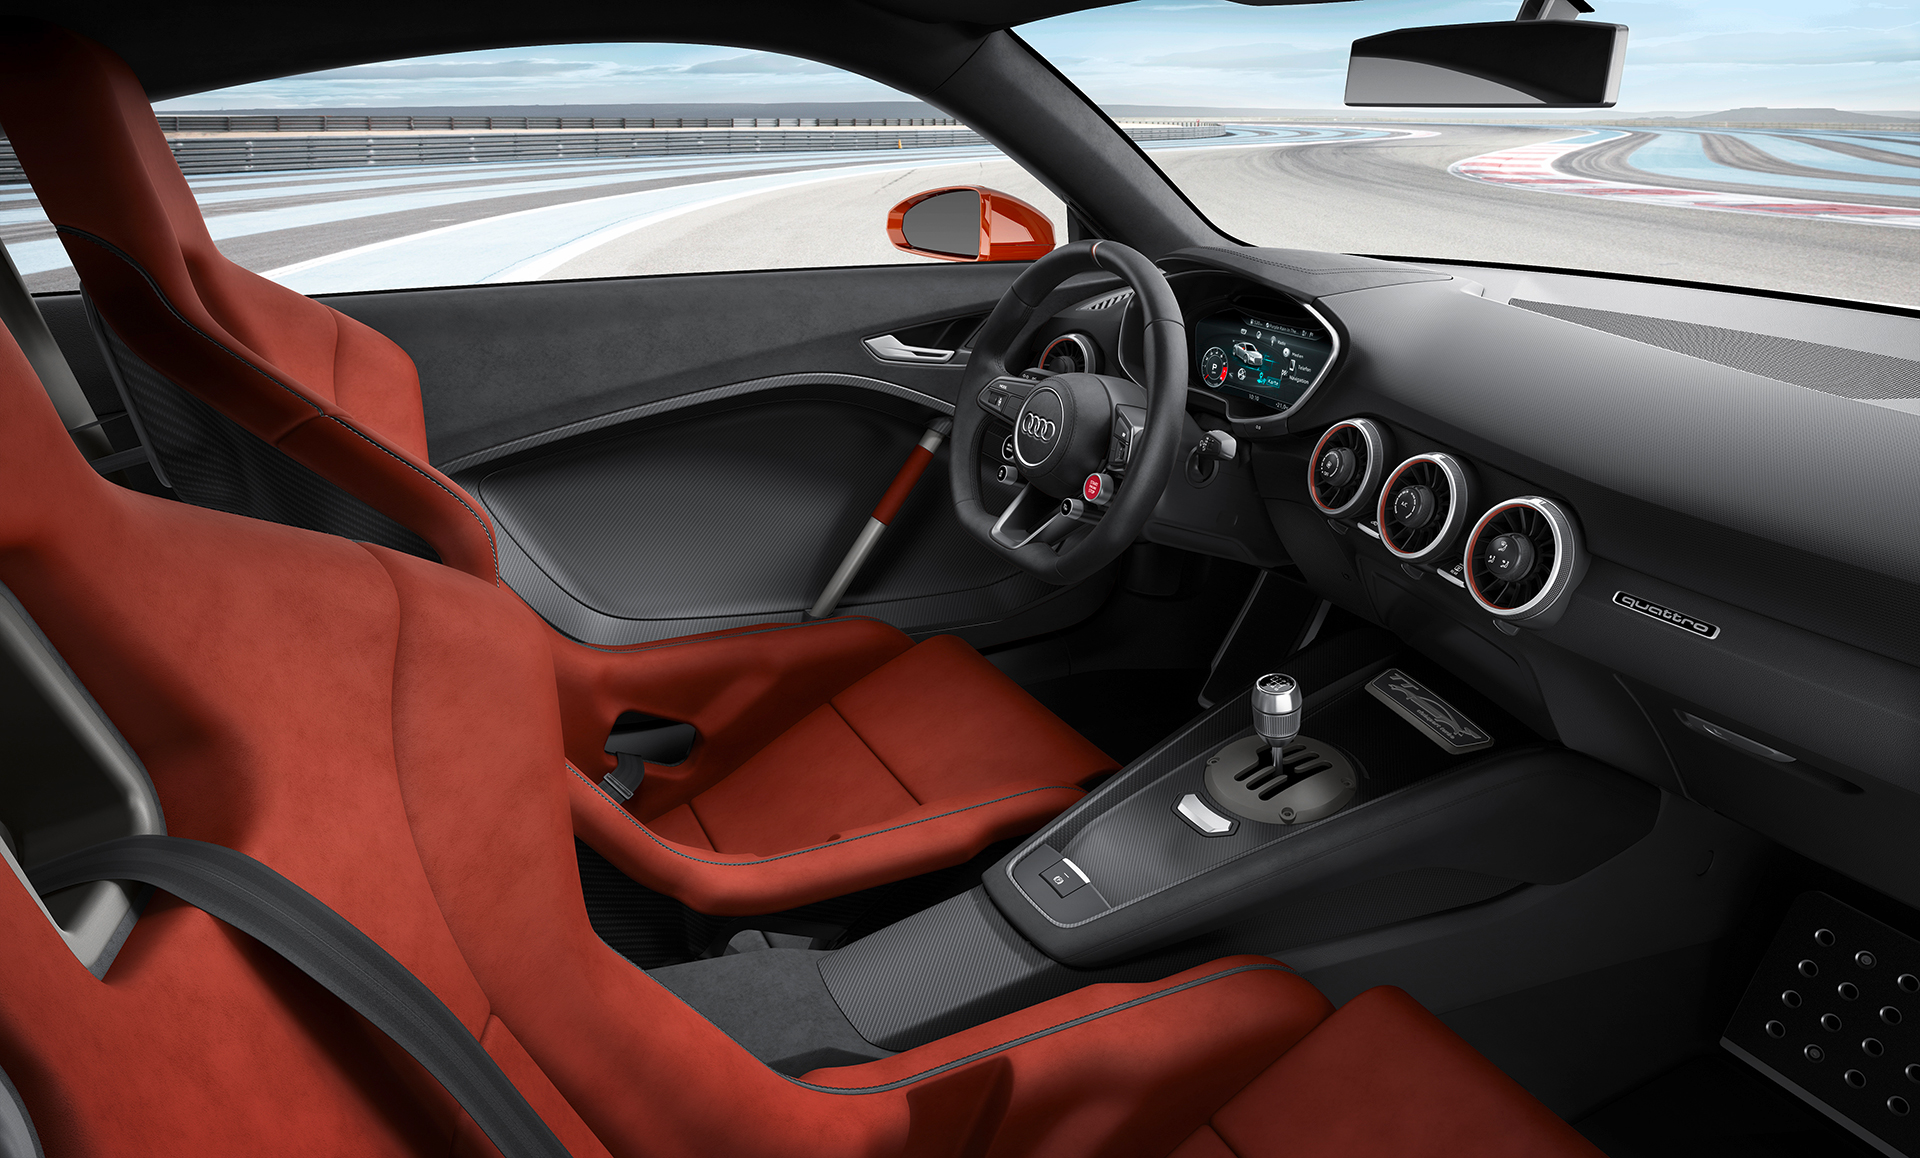 Audi TT clubsport turbo concept - inside with racing whell / intérieur avec volant